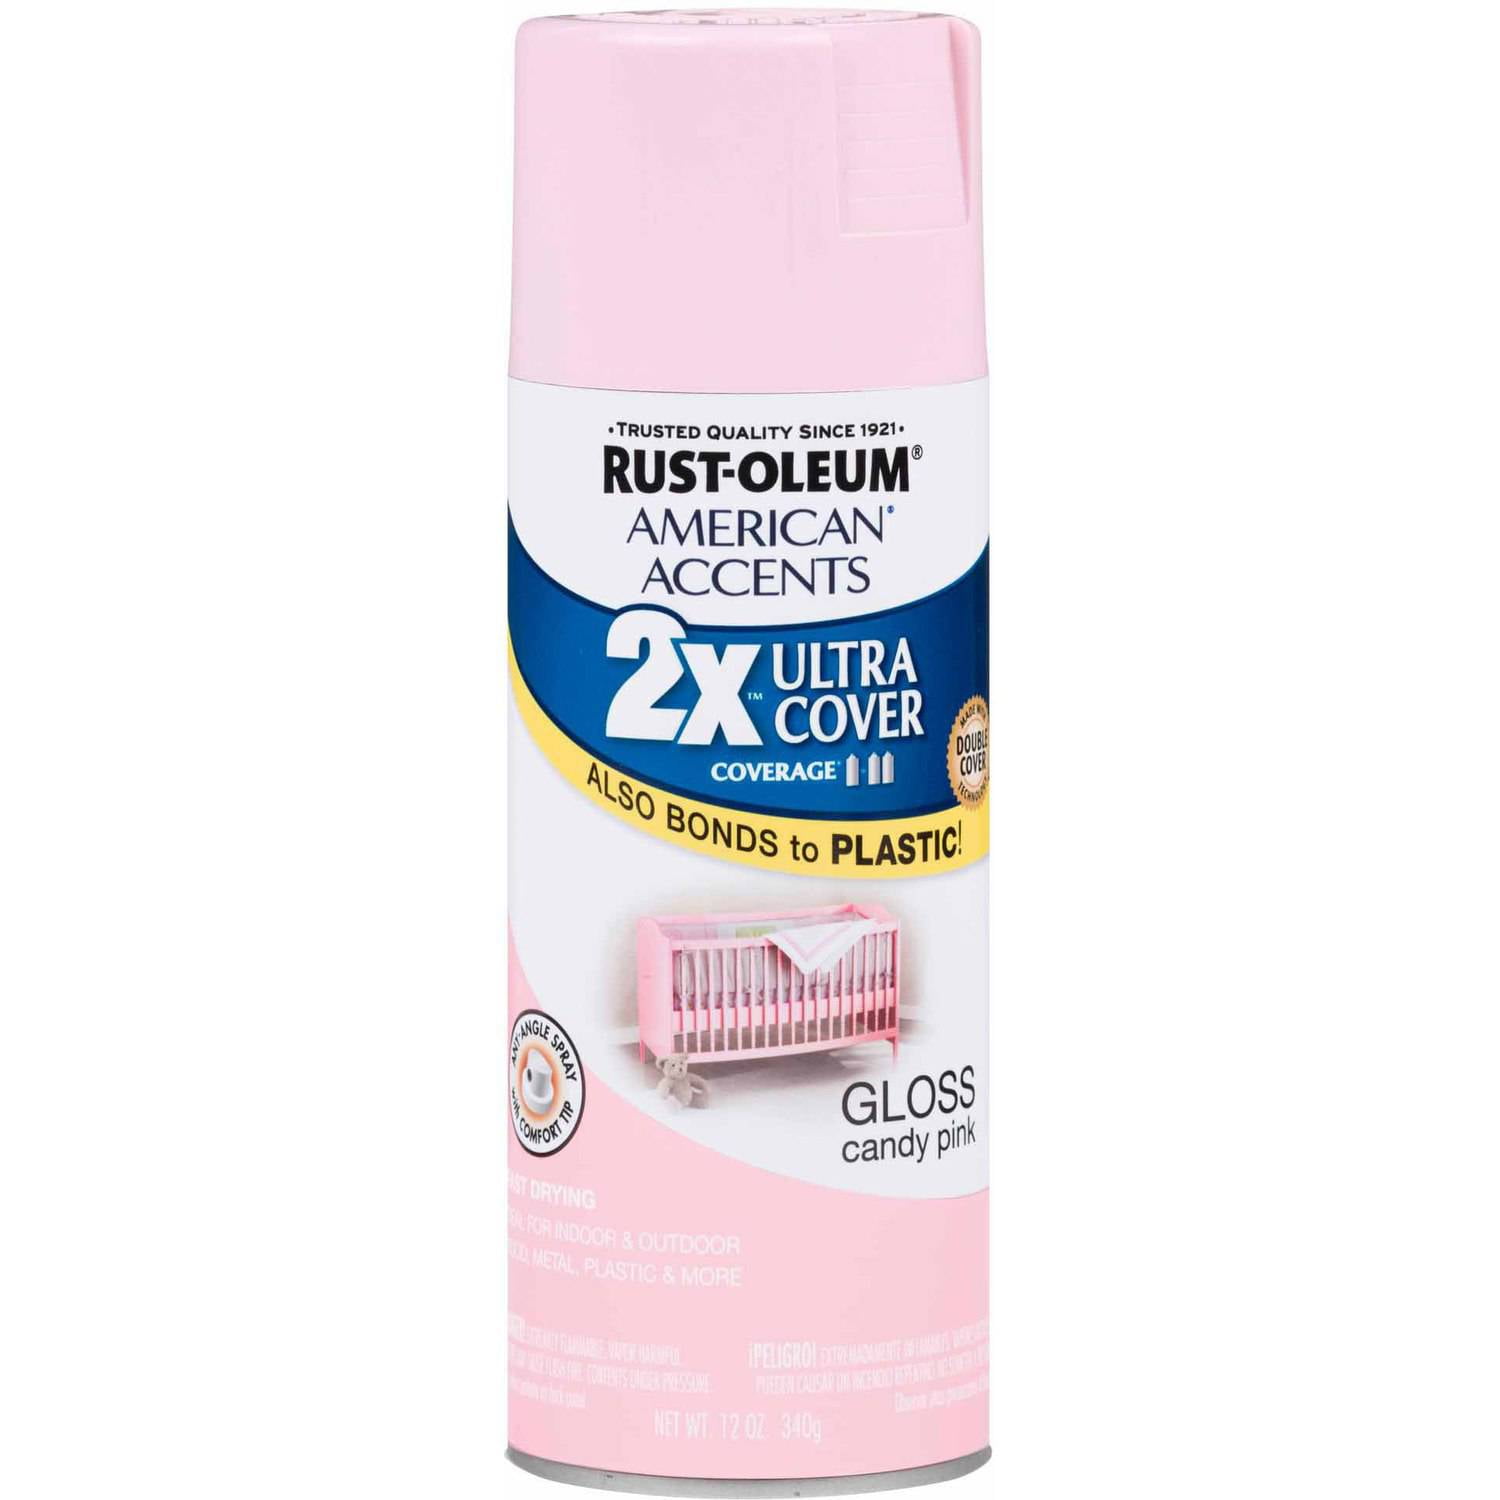 Rust-Oleum American Accents Ultra Cover 2X Gloss Candy Pink Spray Paint and  Primer in 1, 12 oz